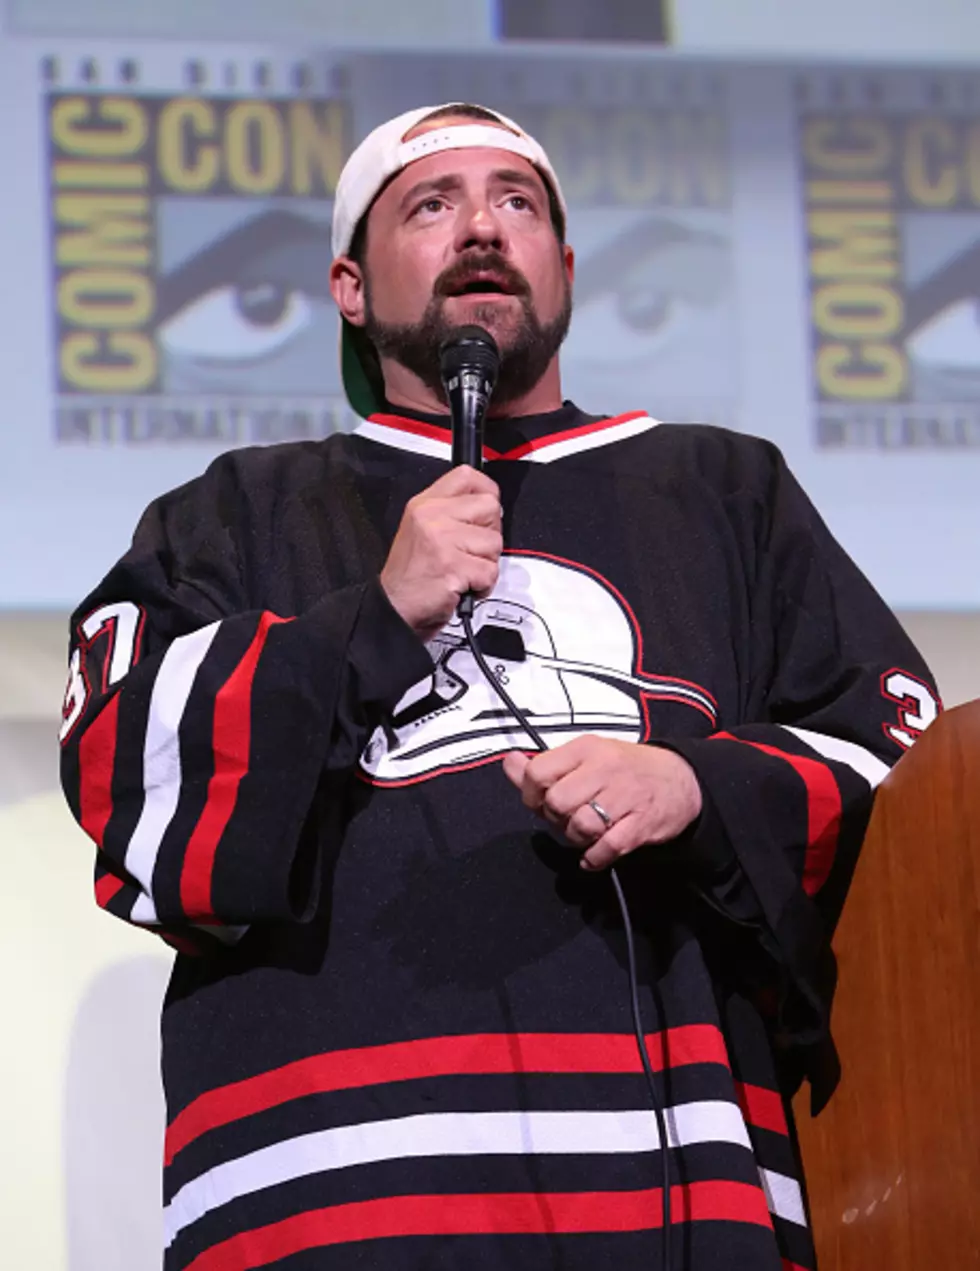 That’s Metal! Kevin Smith Just Ordered A LOT Of Donuts For A Meeting